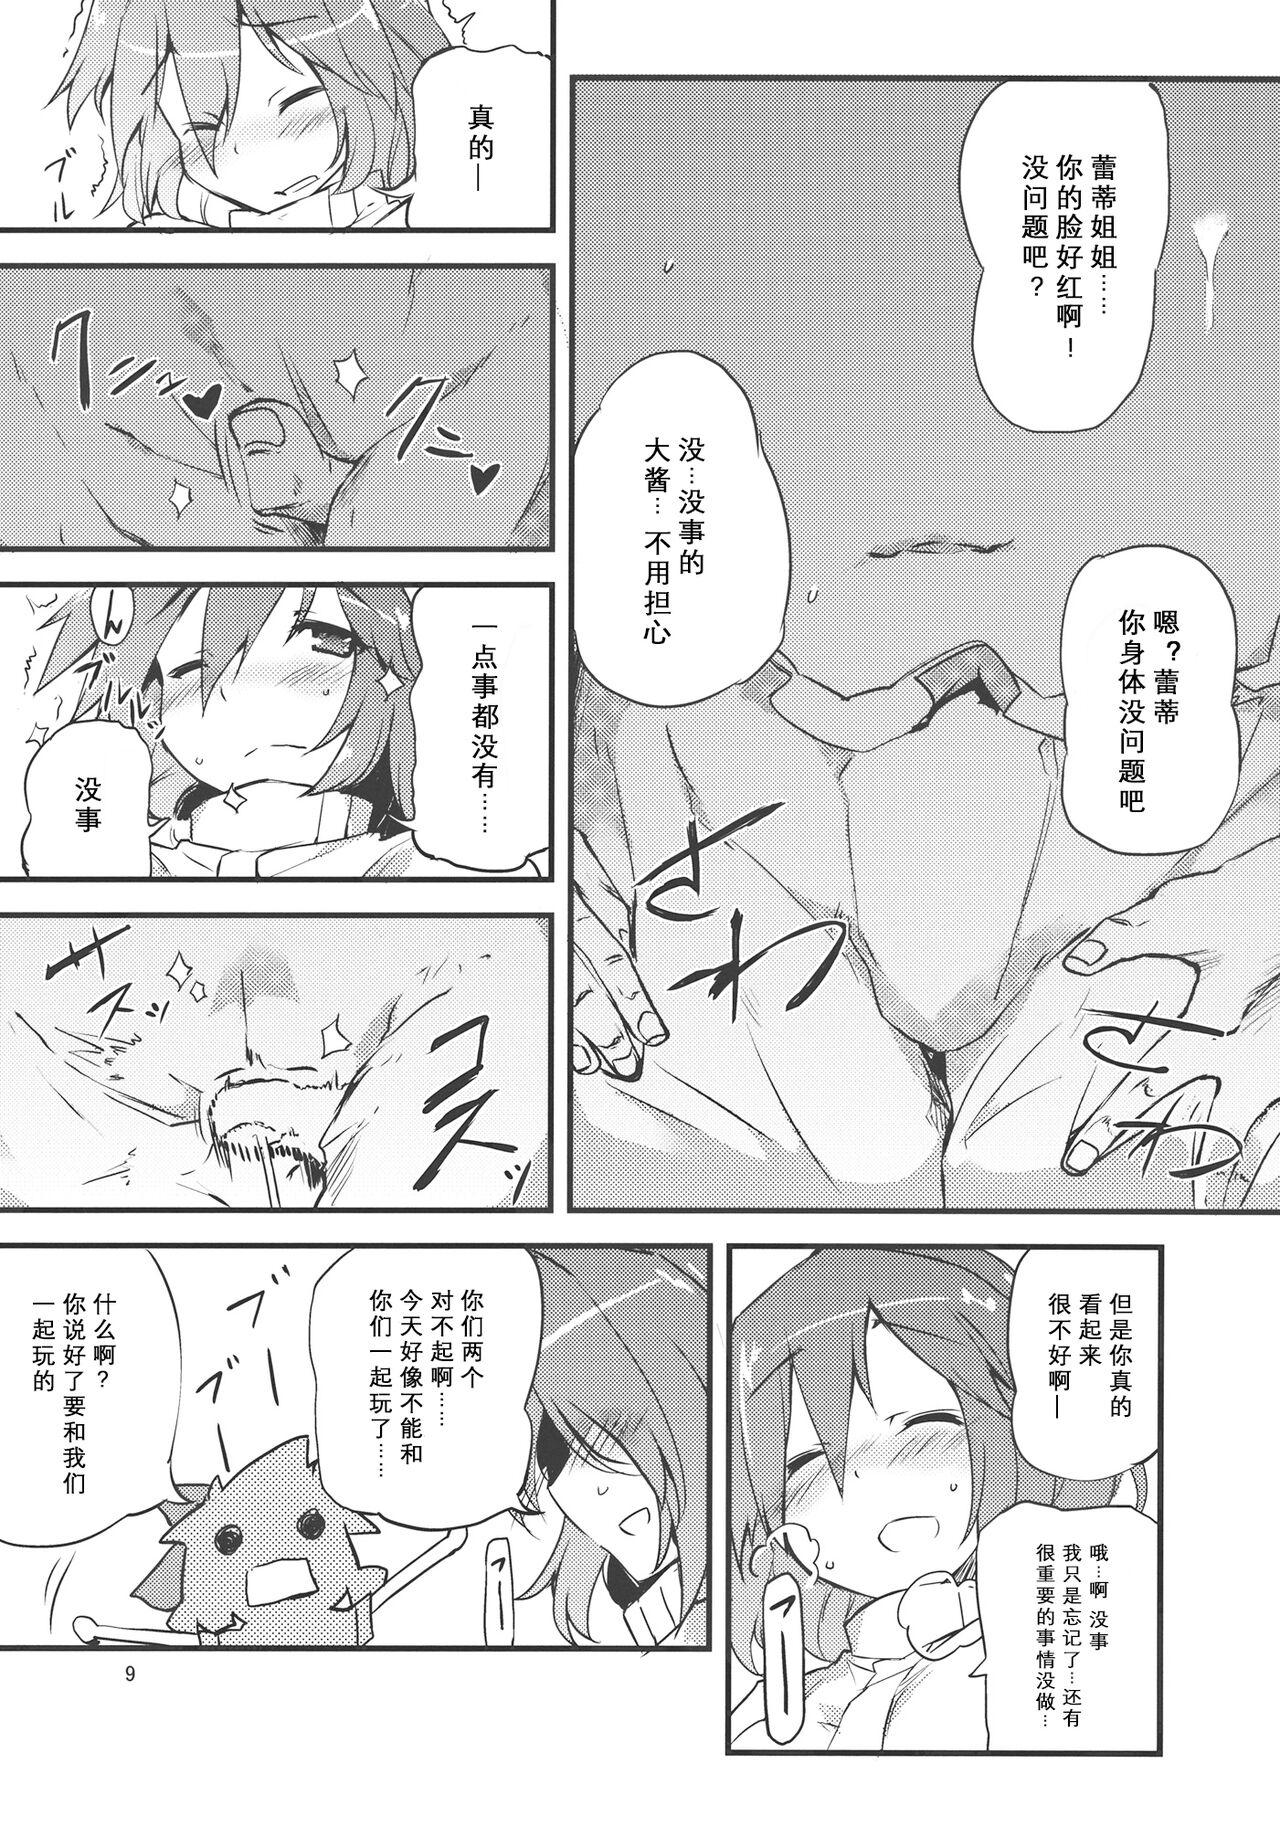 Smooth x Letty | ×蕾蒂 - Touhou project Porn Pussy - Page 9